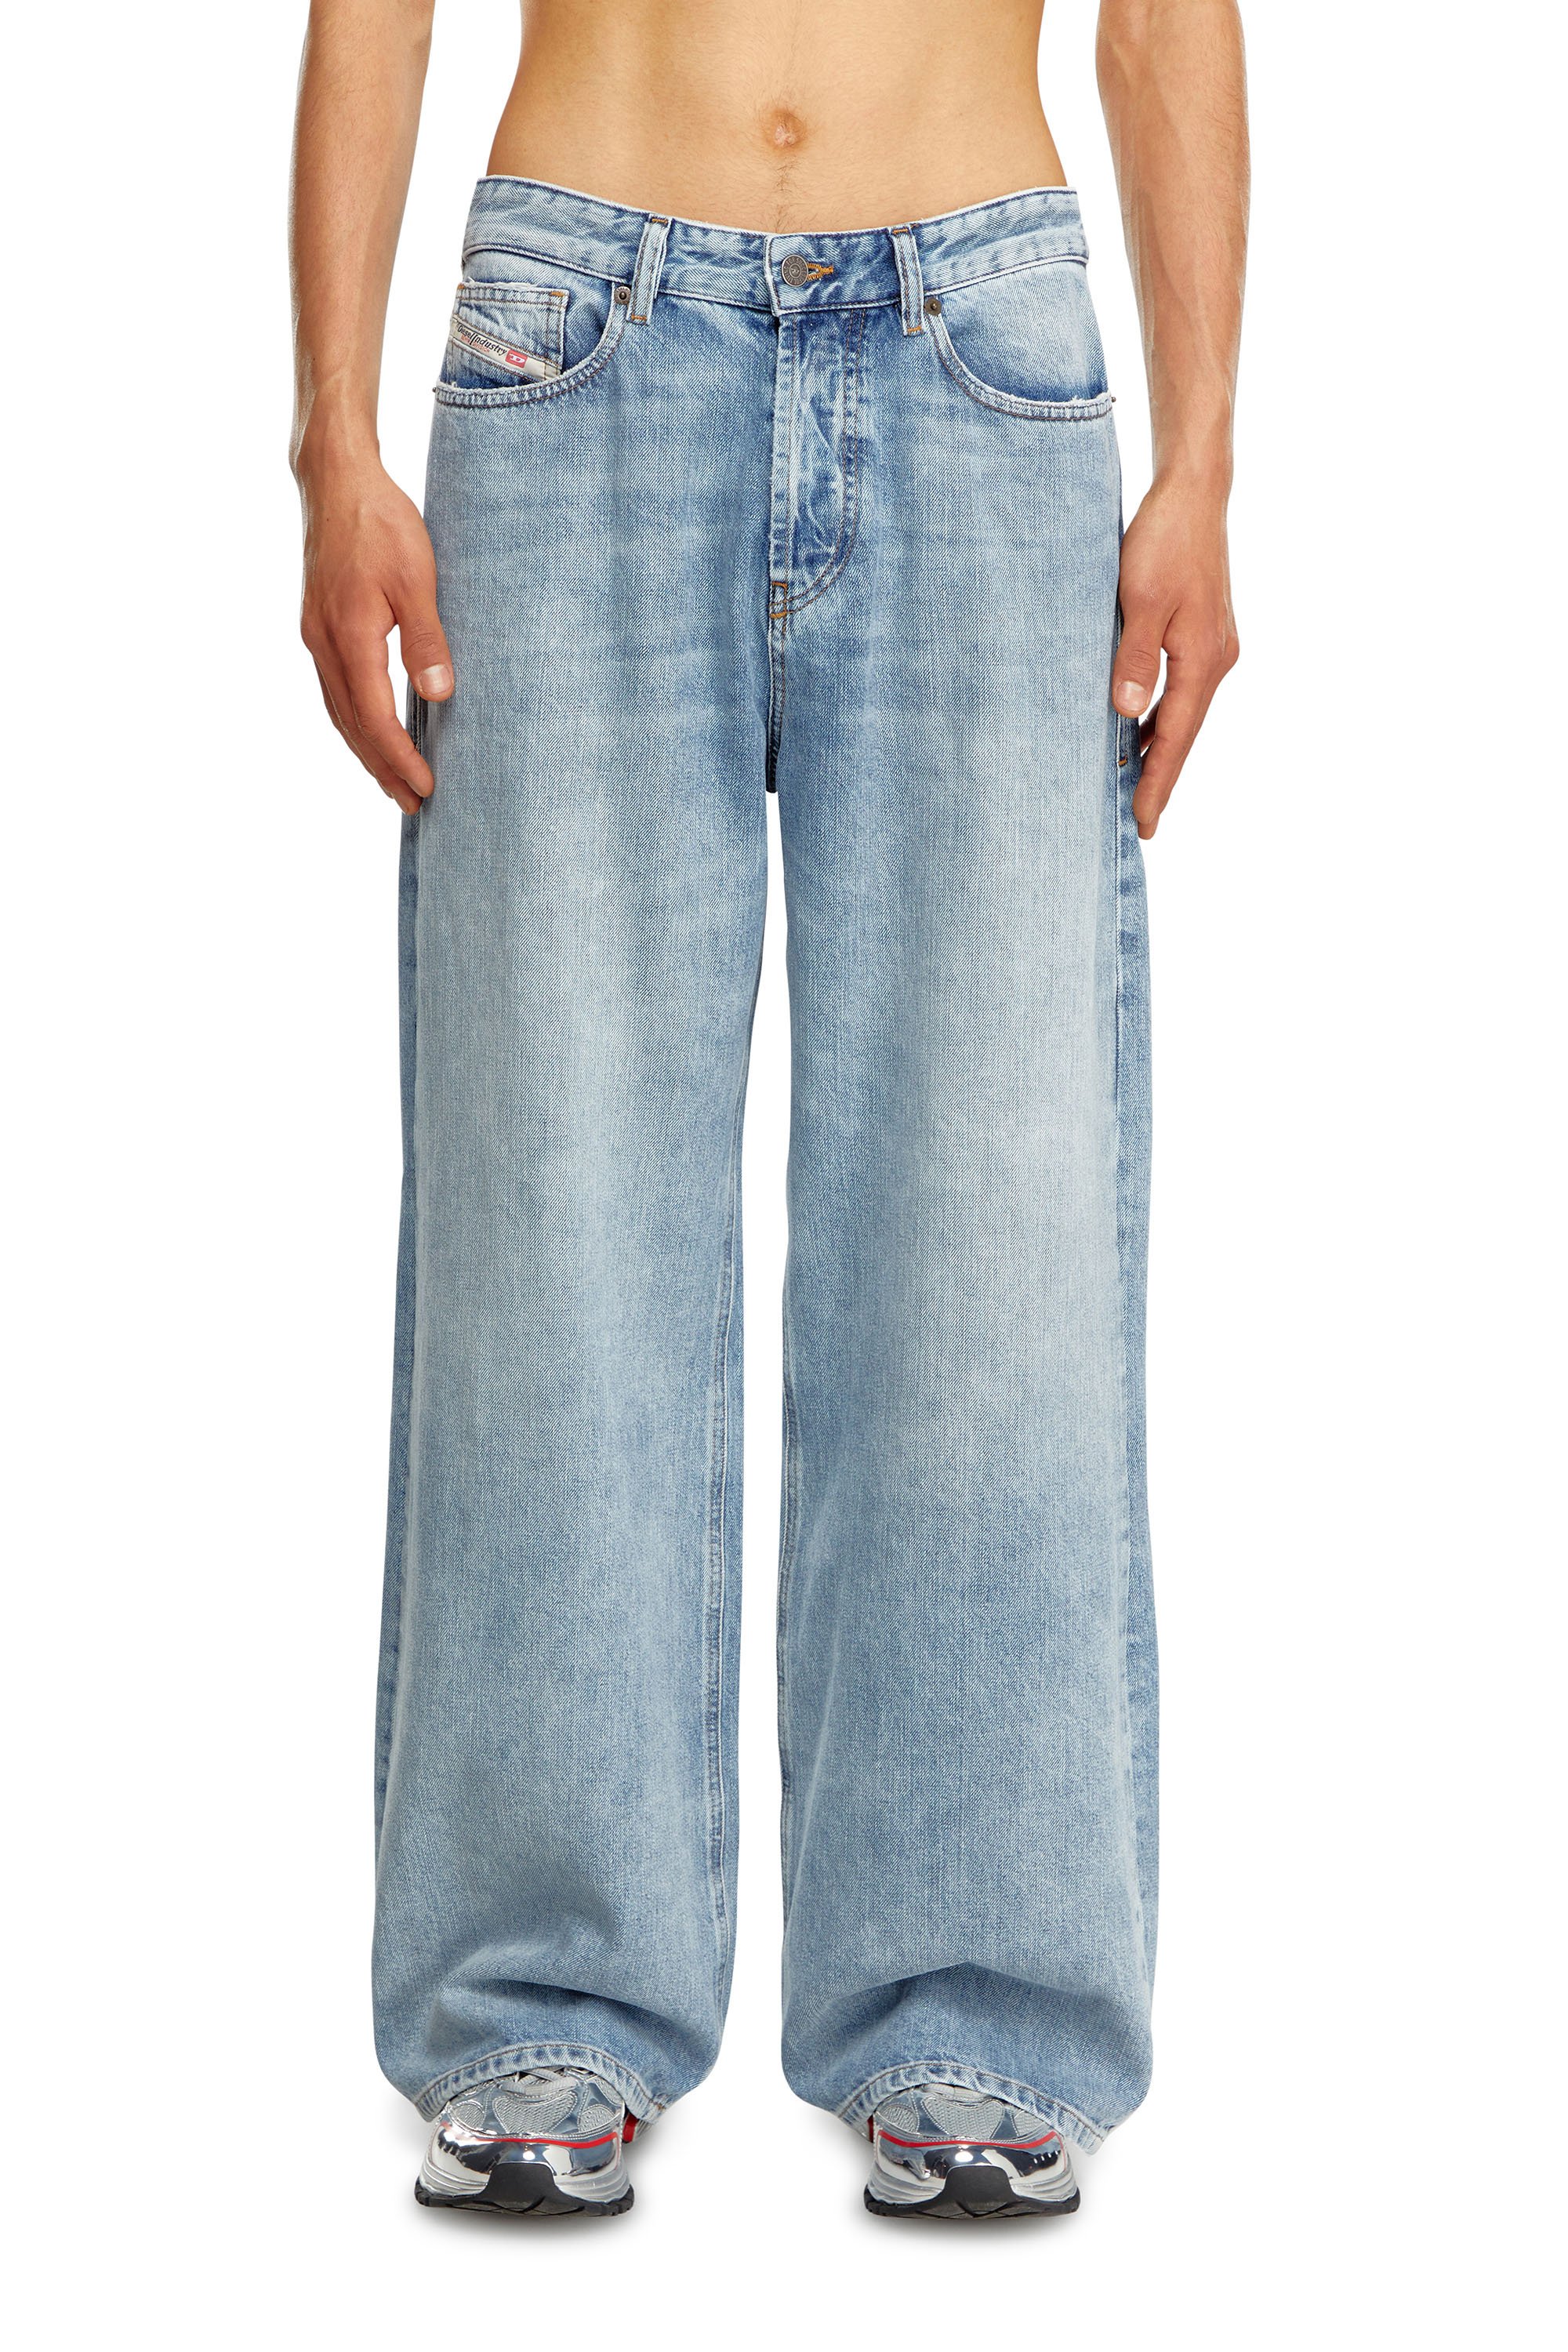 Diesel - Straight Jeans 1996 D-Sire 09H57, Mujer Straight Jeans - 1996 D-Sire in Azul marino - Image 5